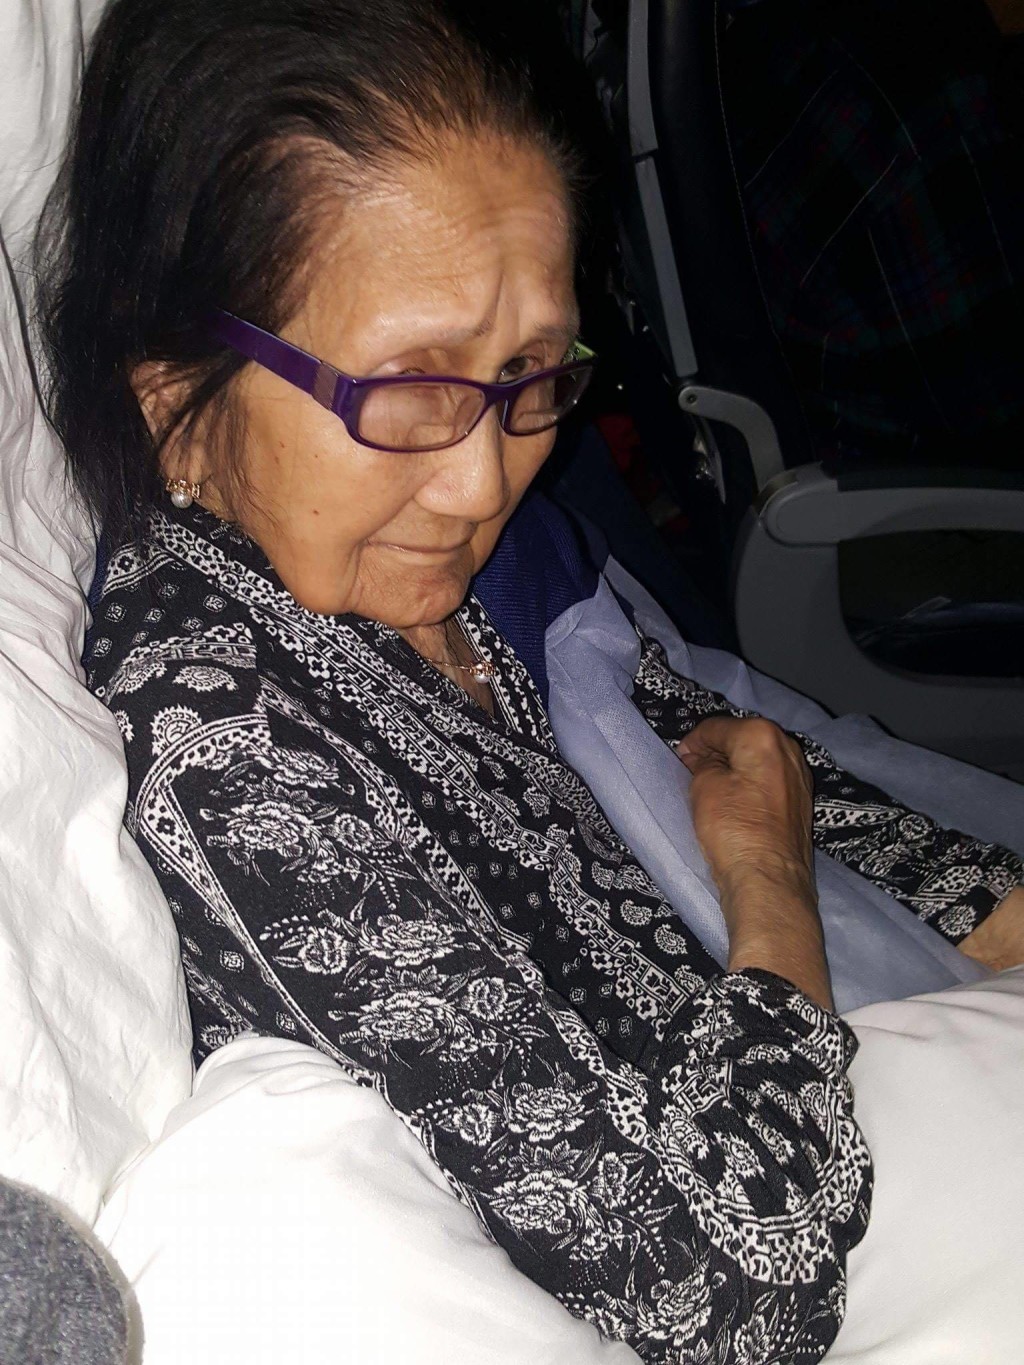 Paz Arquiza, 94, has reportedly also experienced how United Airlines treats some of its passengers. PHOTO COURTESY OF MARIANNE SANTOS AGUILAR